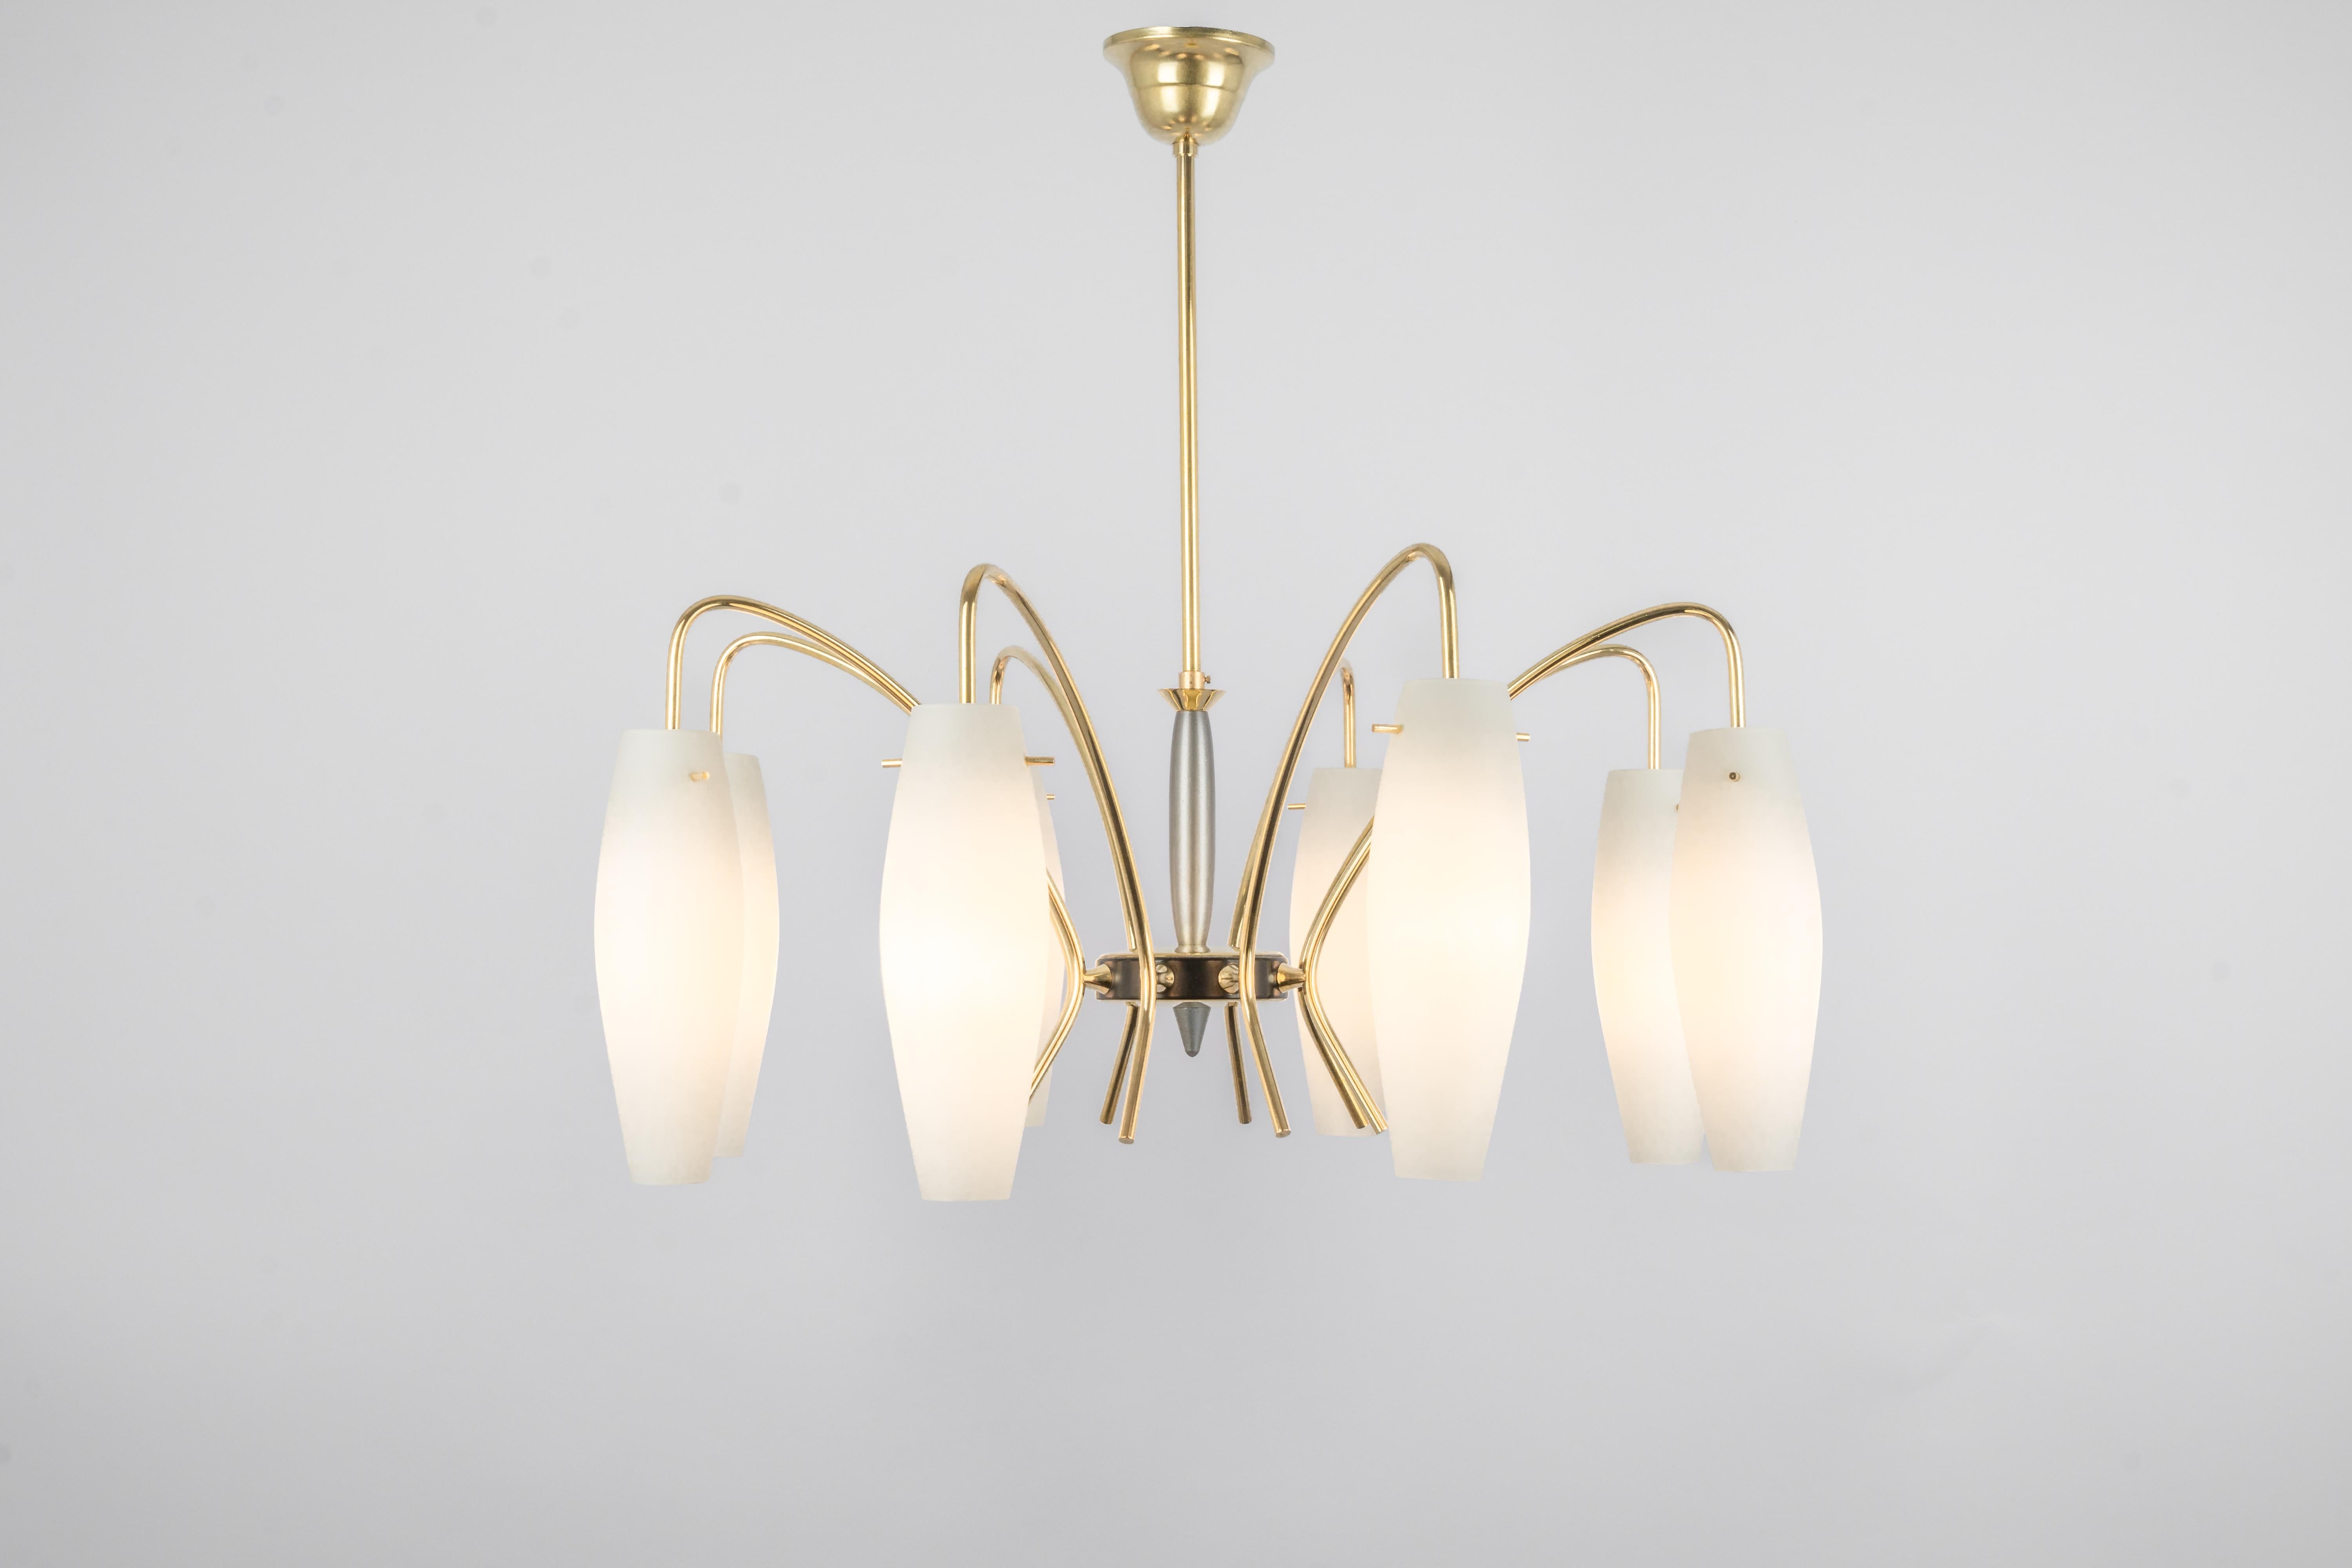 A stunning eight-light chandelier in the manner of Stilnovo, Italy, manufactured in circa 1950-1959. A handmade and high-quality piece.

High quality and in very good condition. Cleaned, well-wired and ready to use. 

The fixture requires 8 x